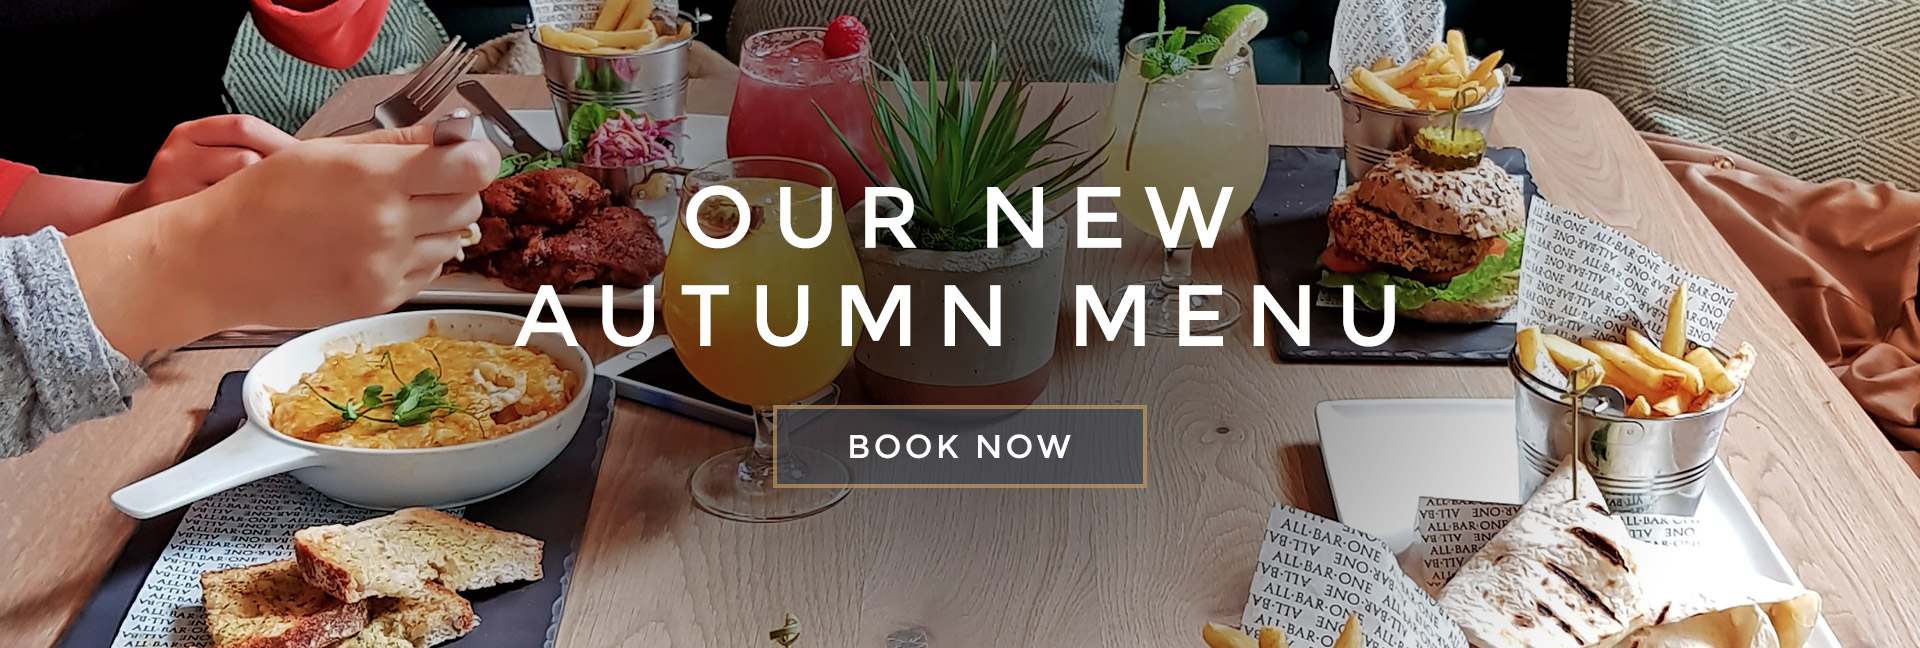 Our new Autumn menu at All Bar One Guildford - Book now